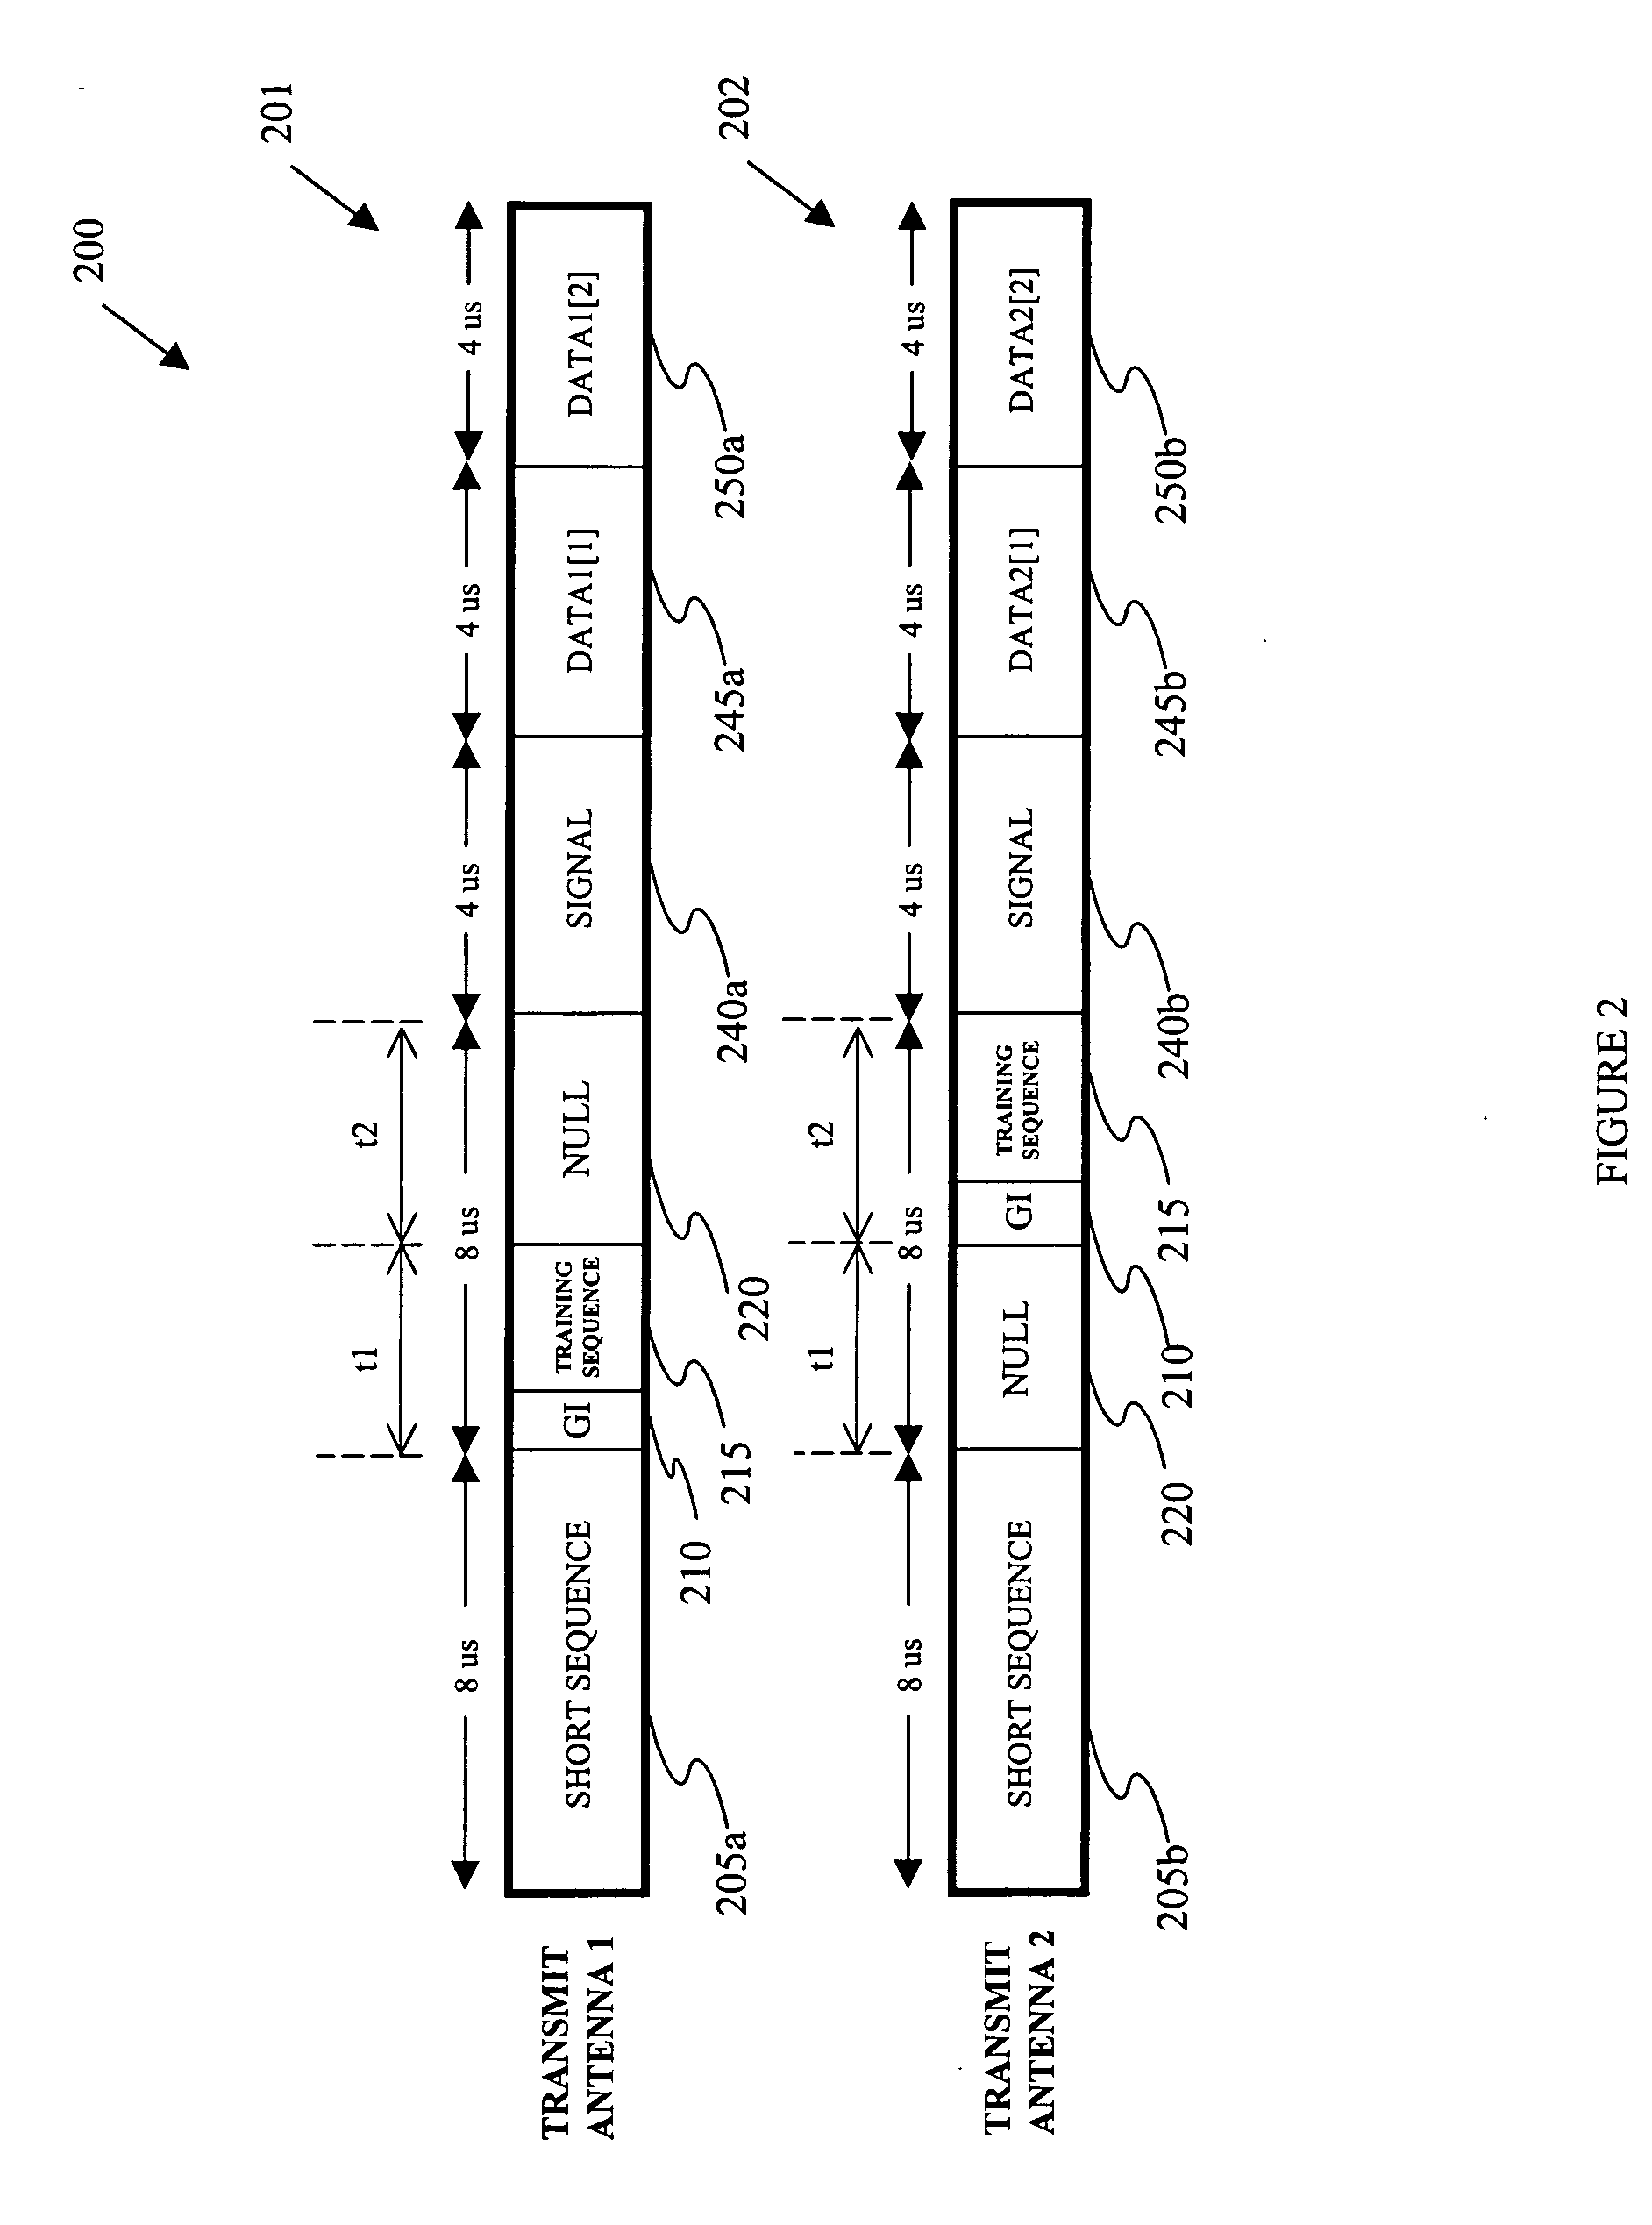 Time-switched preamble generator, method of generating and multiple-input, multiple-output communication system employing the generator and method